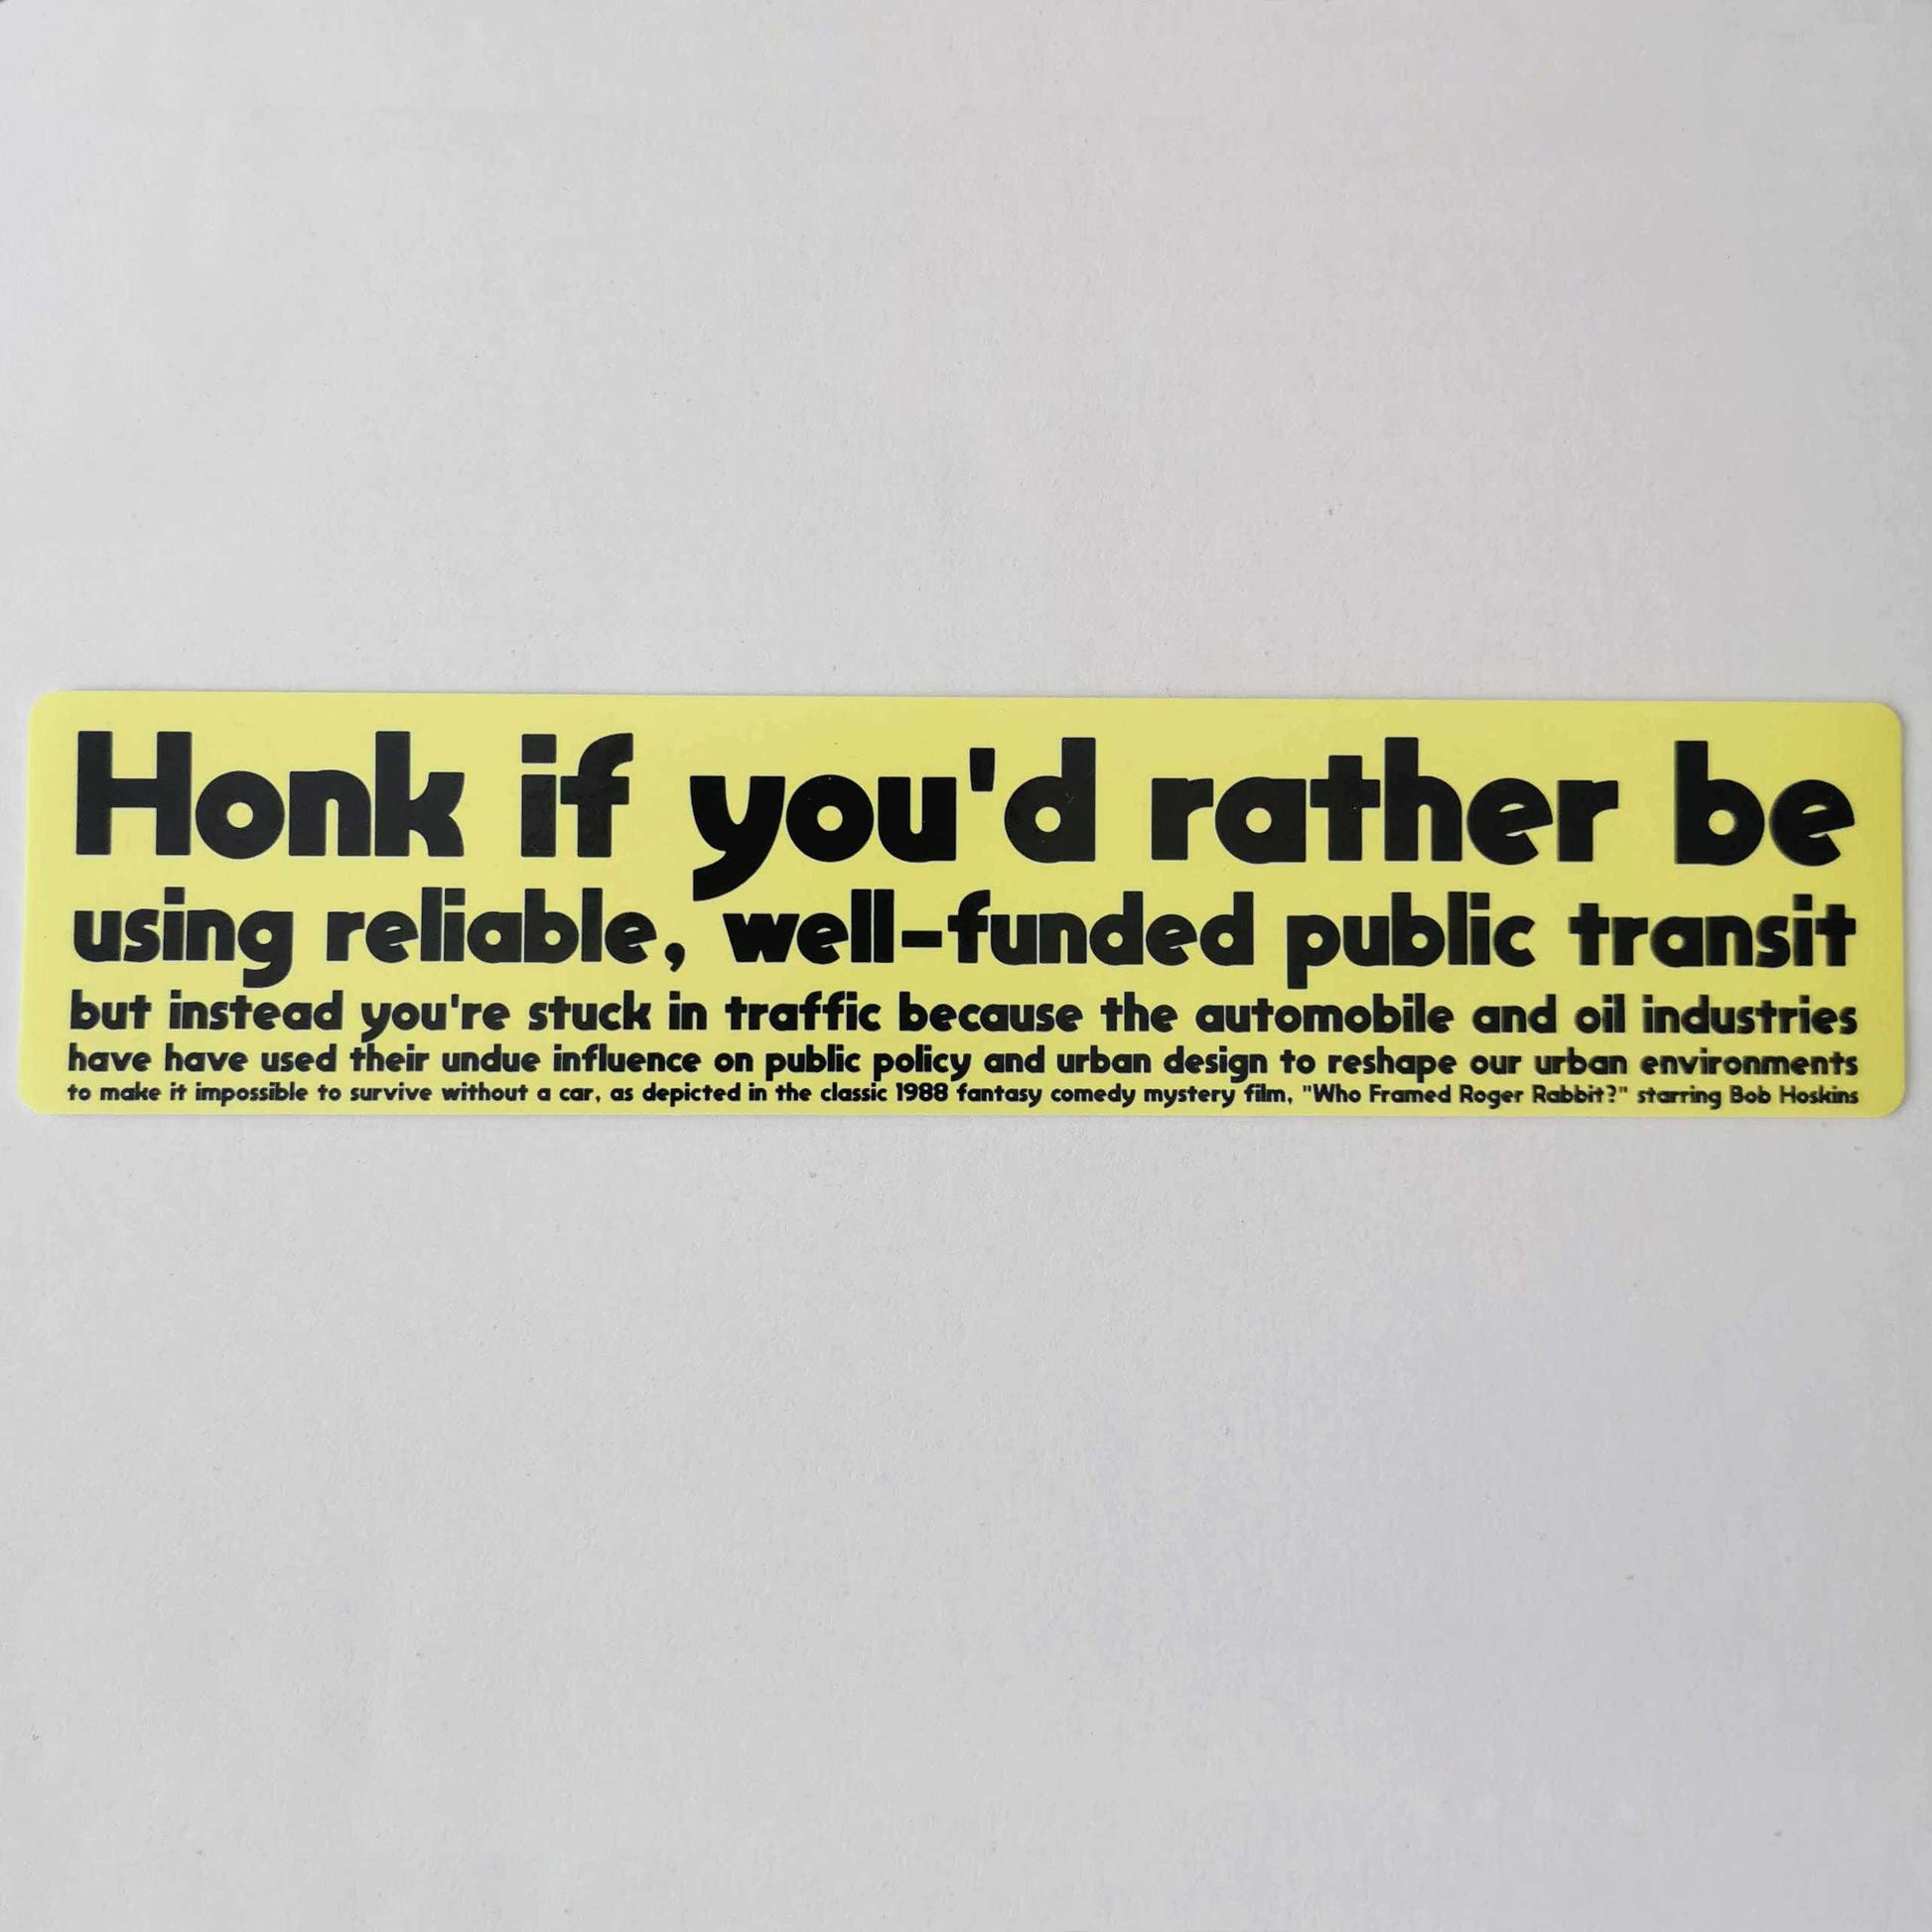 Light yellow bumper sticker reading ""Honk if you'd rather be using reliable, well-funded public transit but instead you're stuck in traffic because the automobile and oil industries have used their undue influence on public policy and urban design to reshape our urban environments to make it impossible to survive without a car, as depicted in the classic 1988 fantasy comedy mystery film. "Who Framed Roger Rabbit, starring Bob Hoskins" in bold black sans serif font that gets smaller with each line